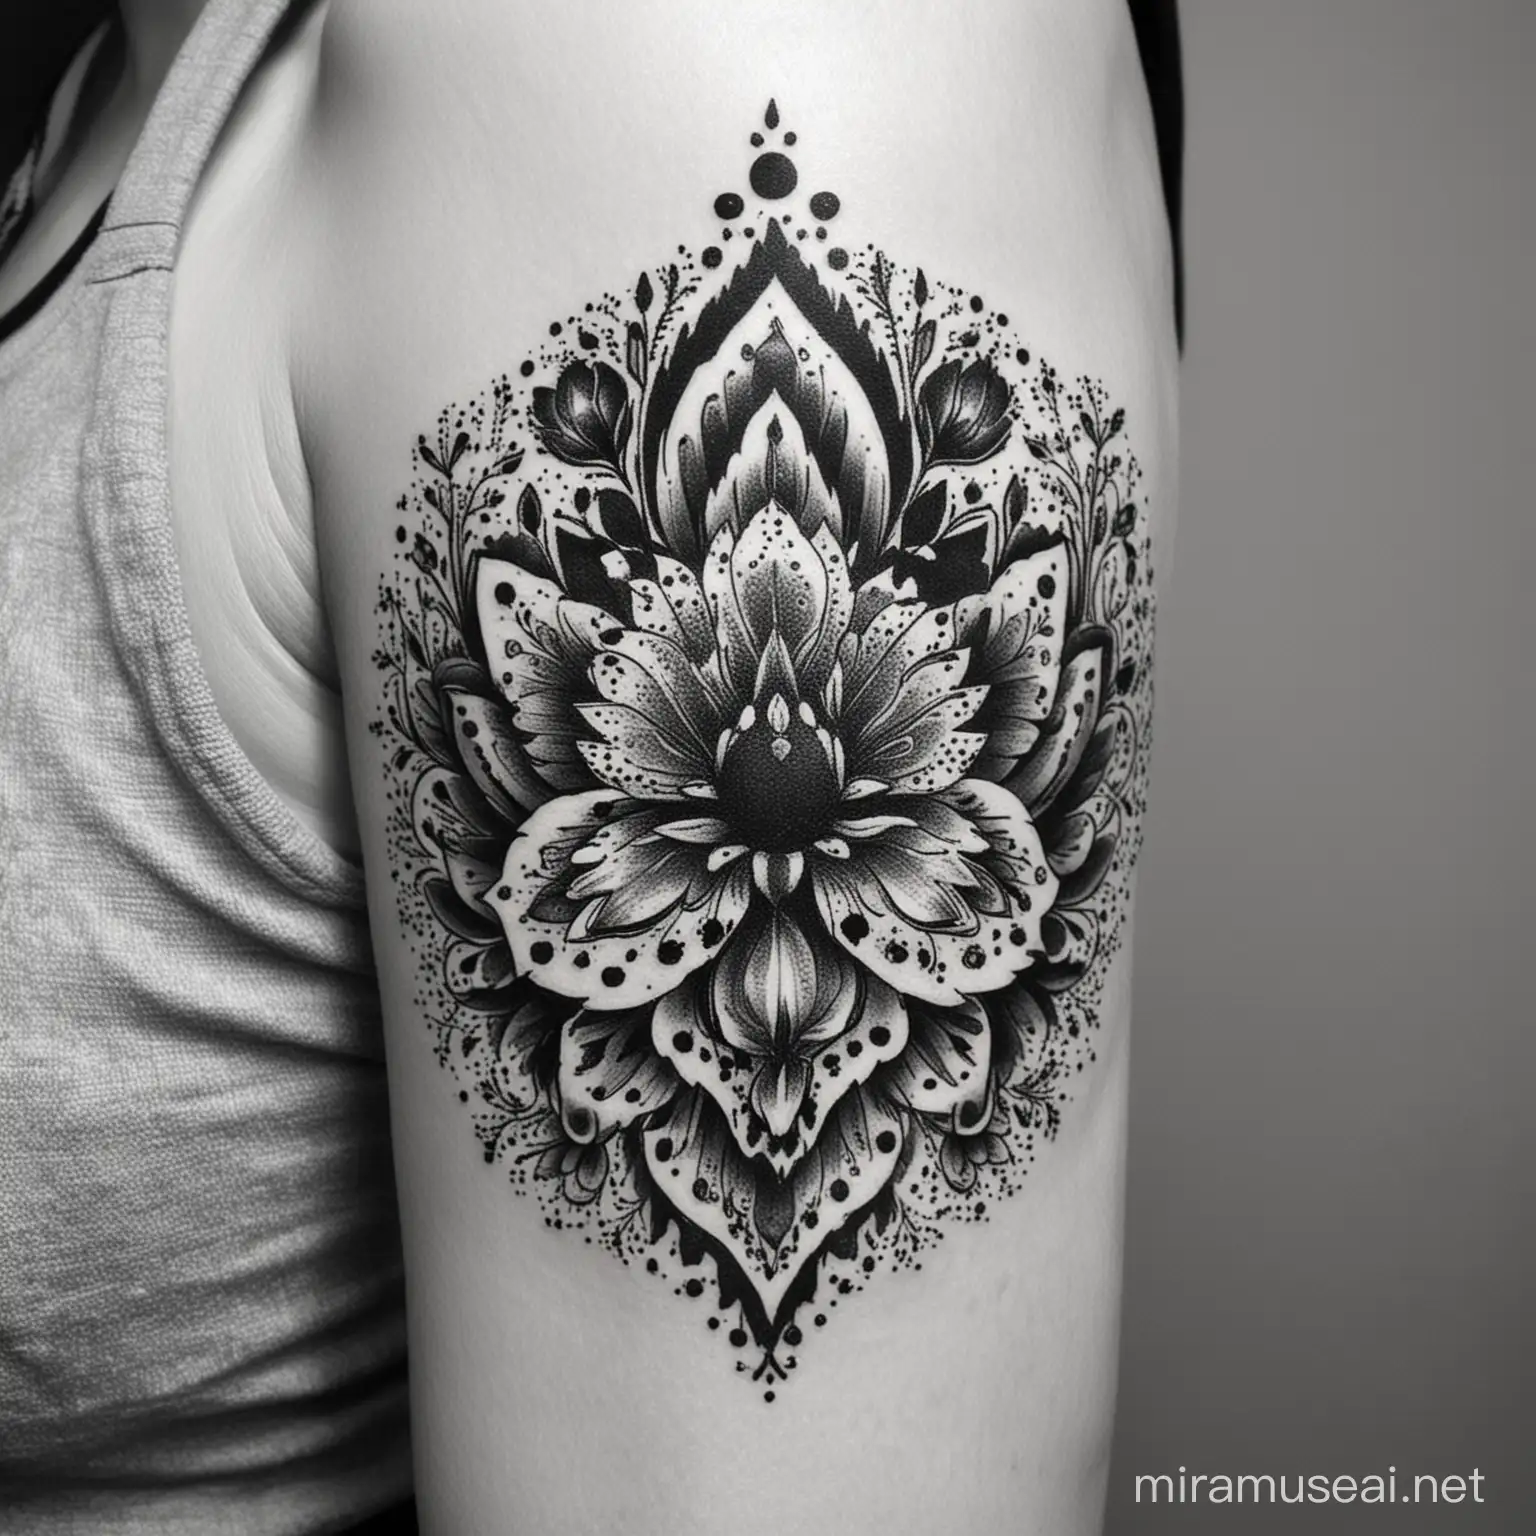 Traditional Hungarian Dotwork Kalocsai Tattoo in Black and White